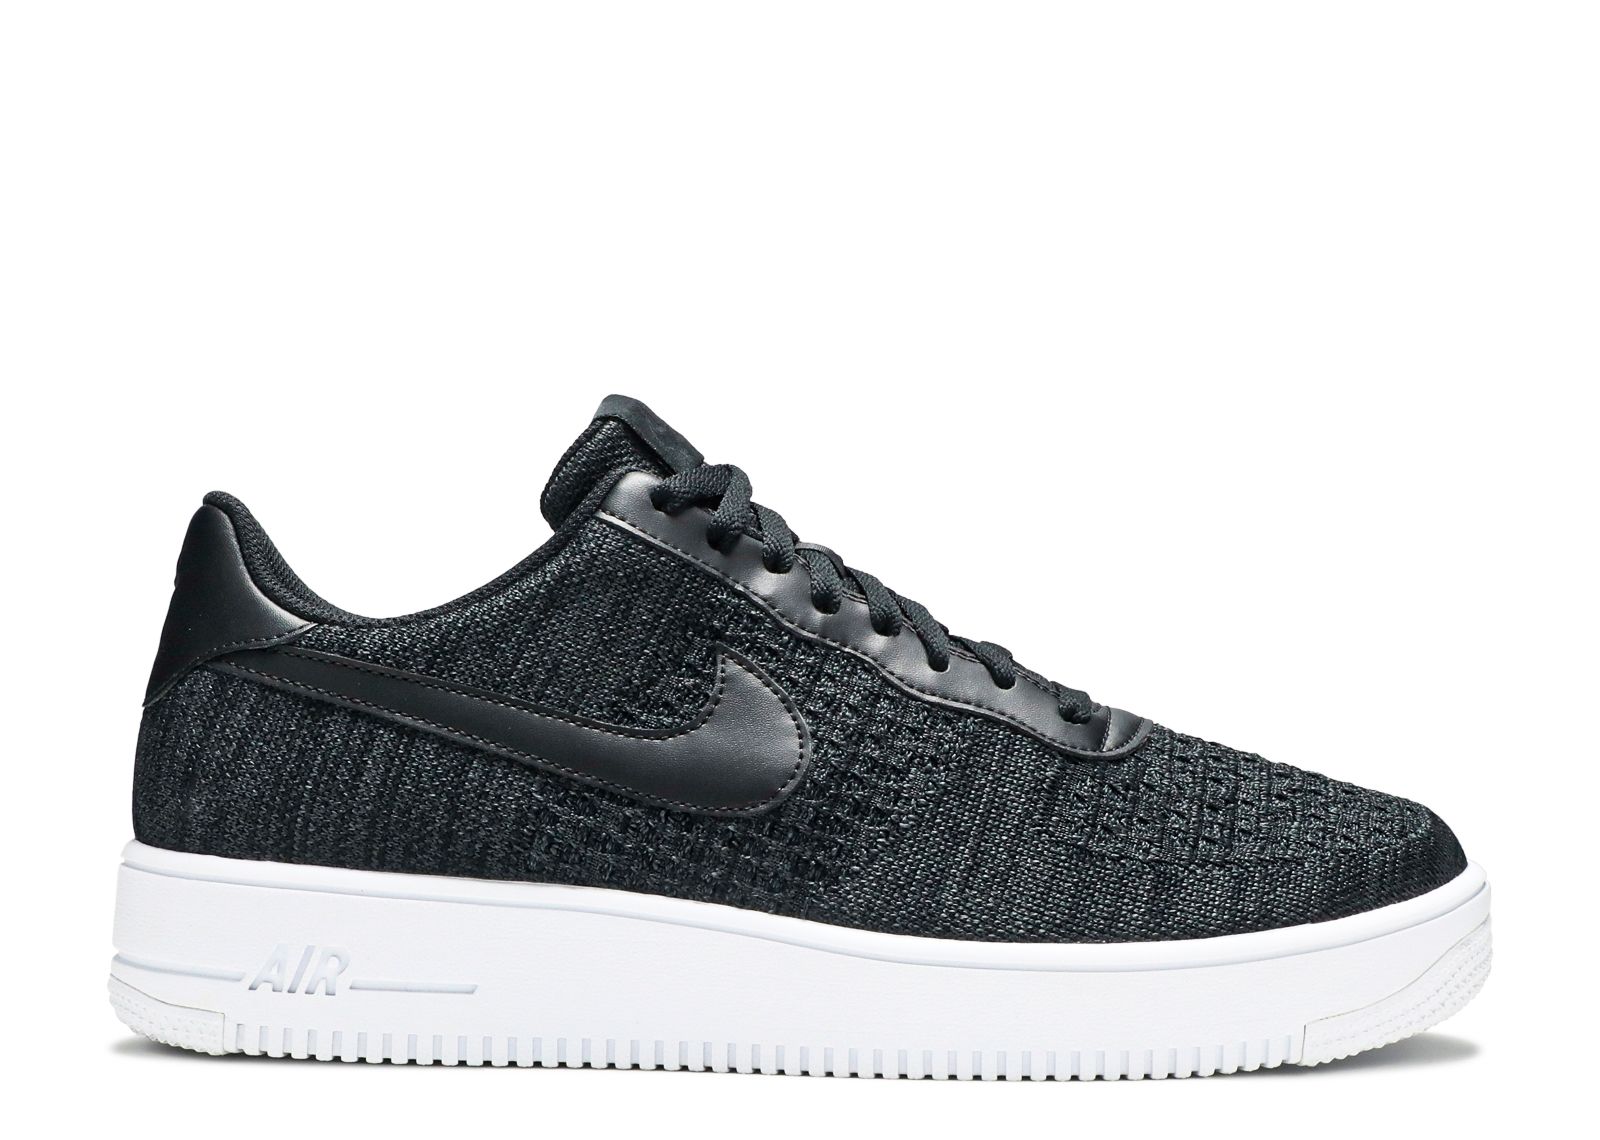 Air Force 1 Flyknit 2.0 'Black Anthracite' - Nike - CI0051 001 - black ...